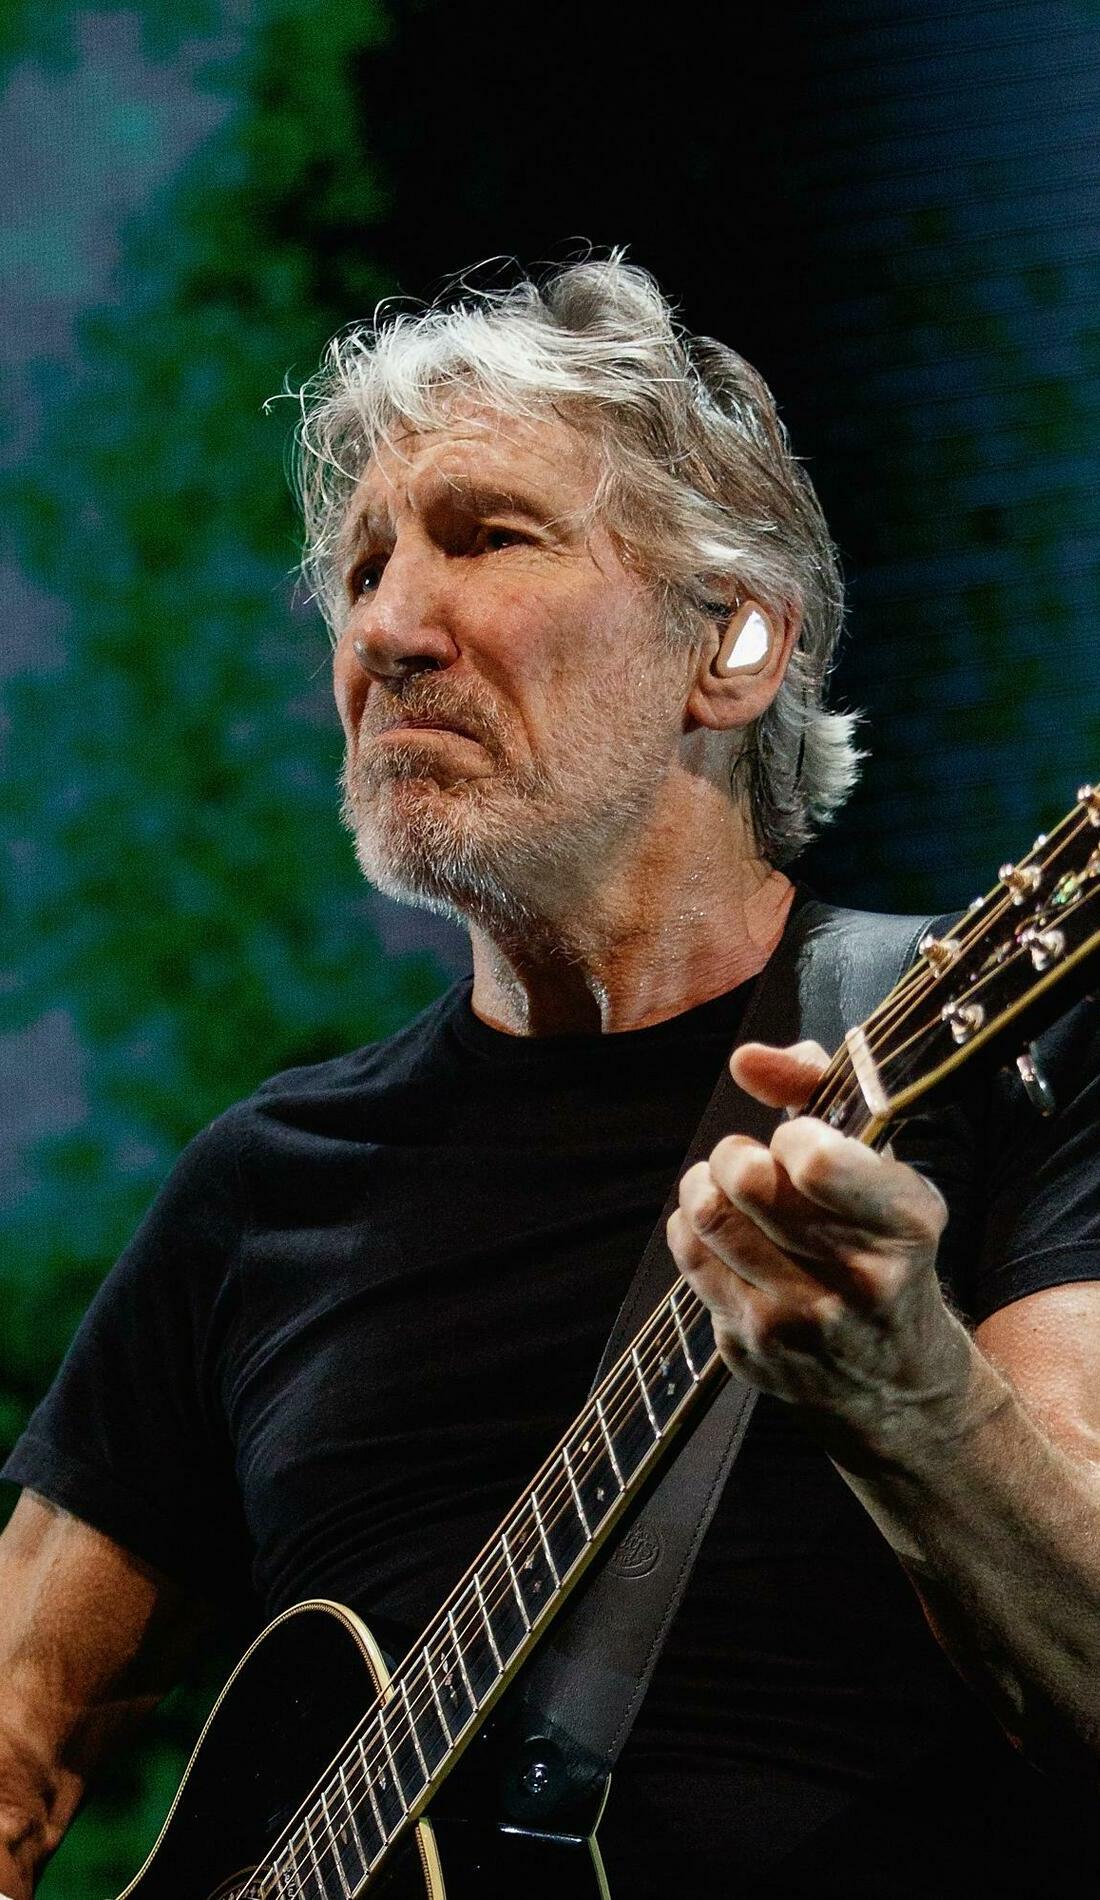 A Roger Waters live event